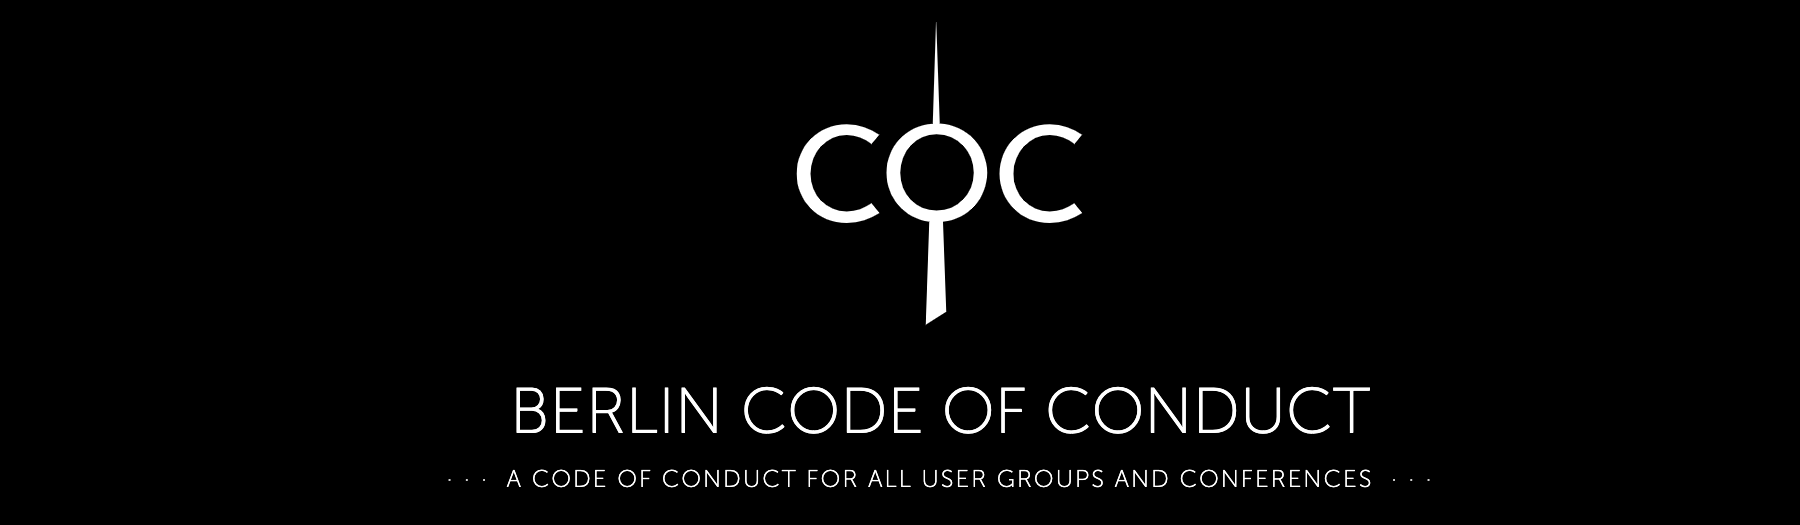 Berlin code of conduct. A code of conduct for all user groups and conferences